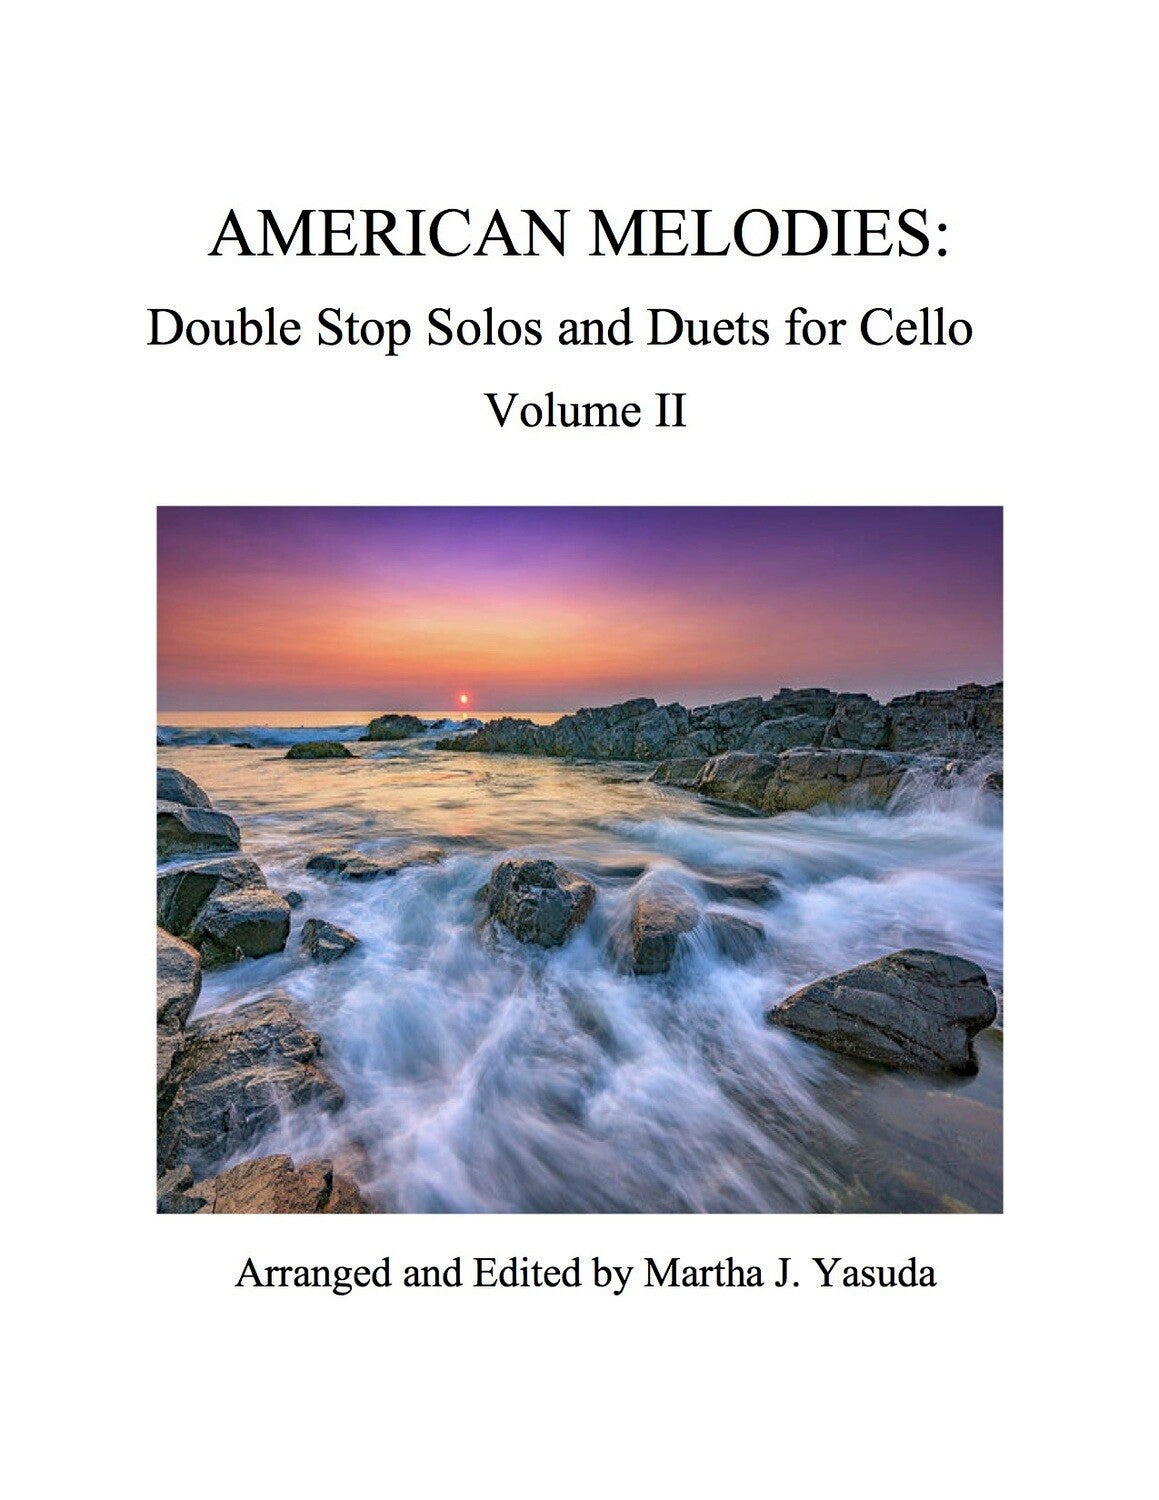 098 - American Melodies For Cello, Double Stop Solos and Duets, Volume II